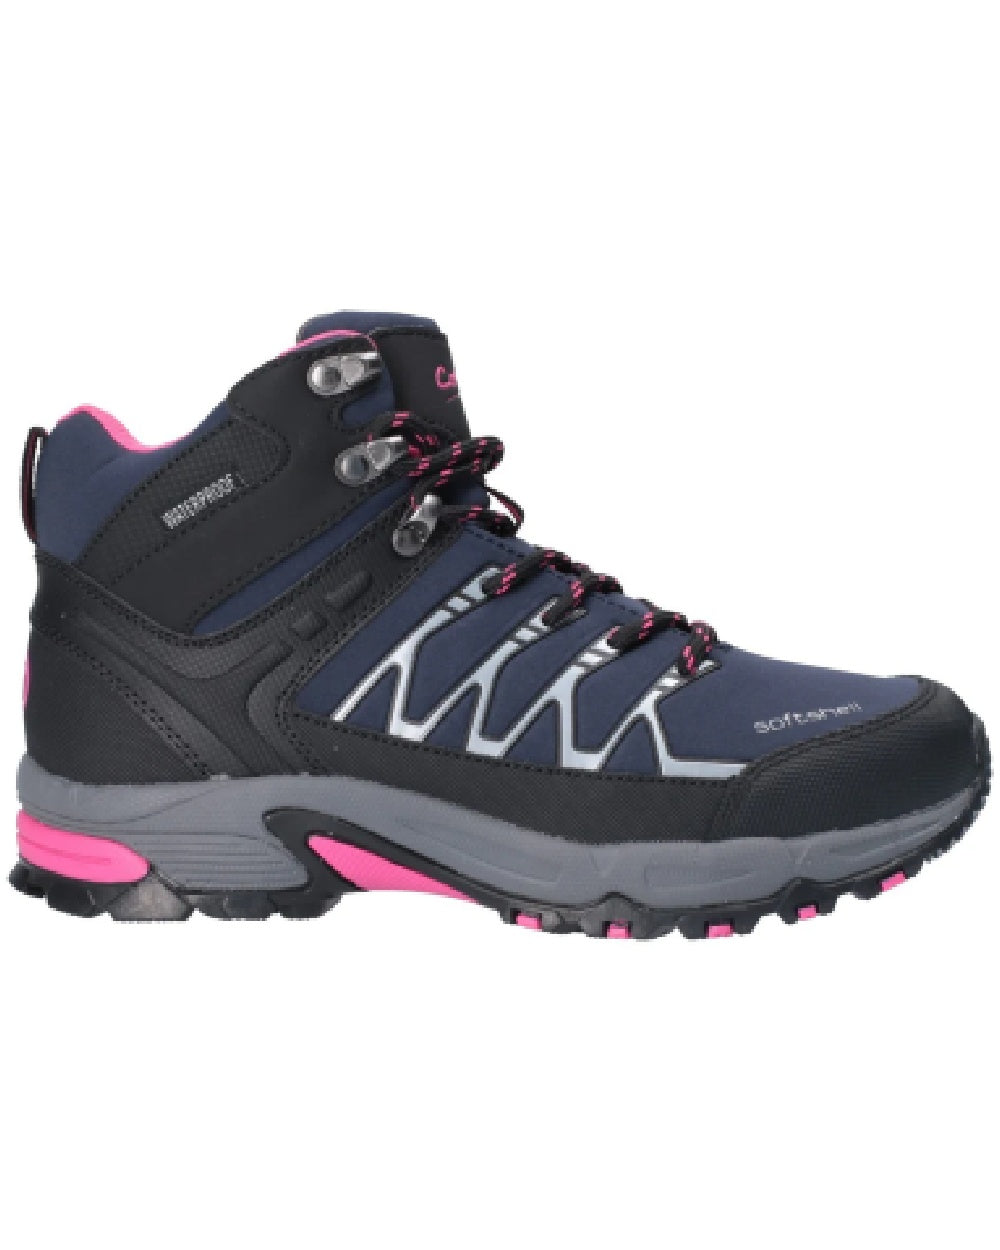 Cotswold Womens Abbeydale Mid Hiking Boots in Black Fuchsia 